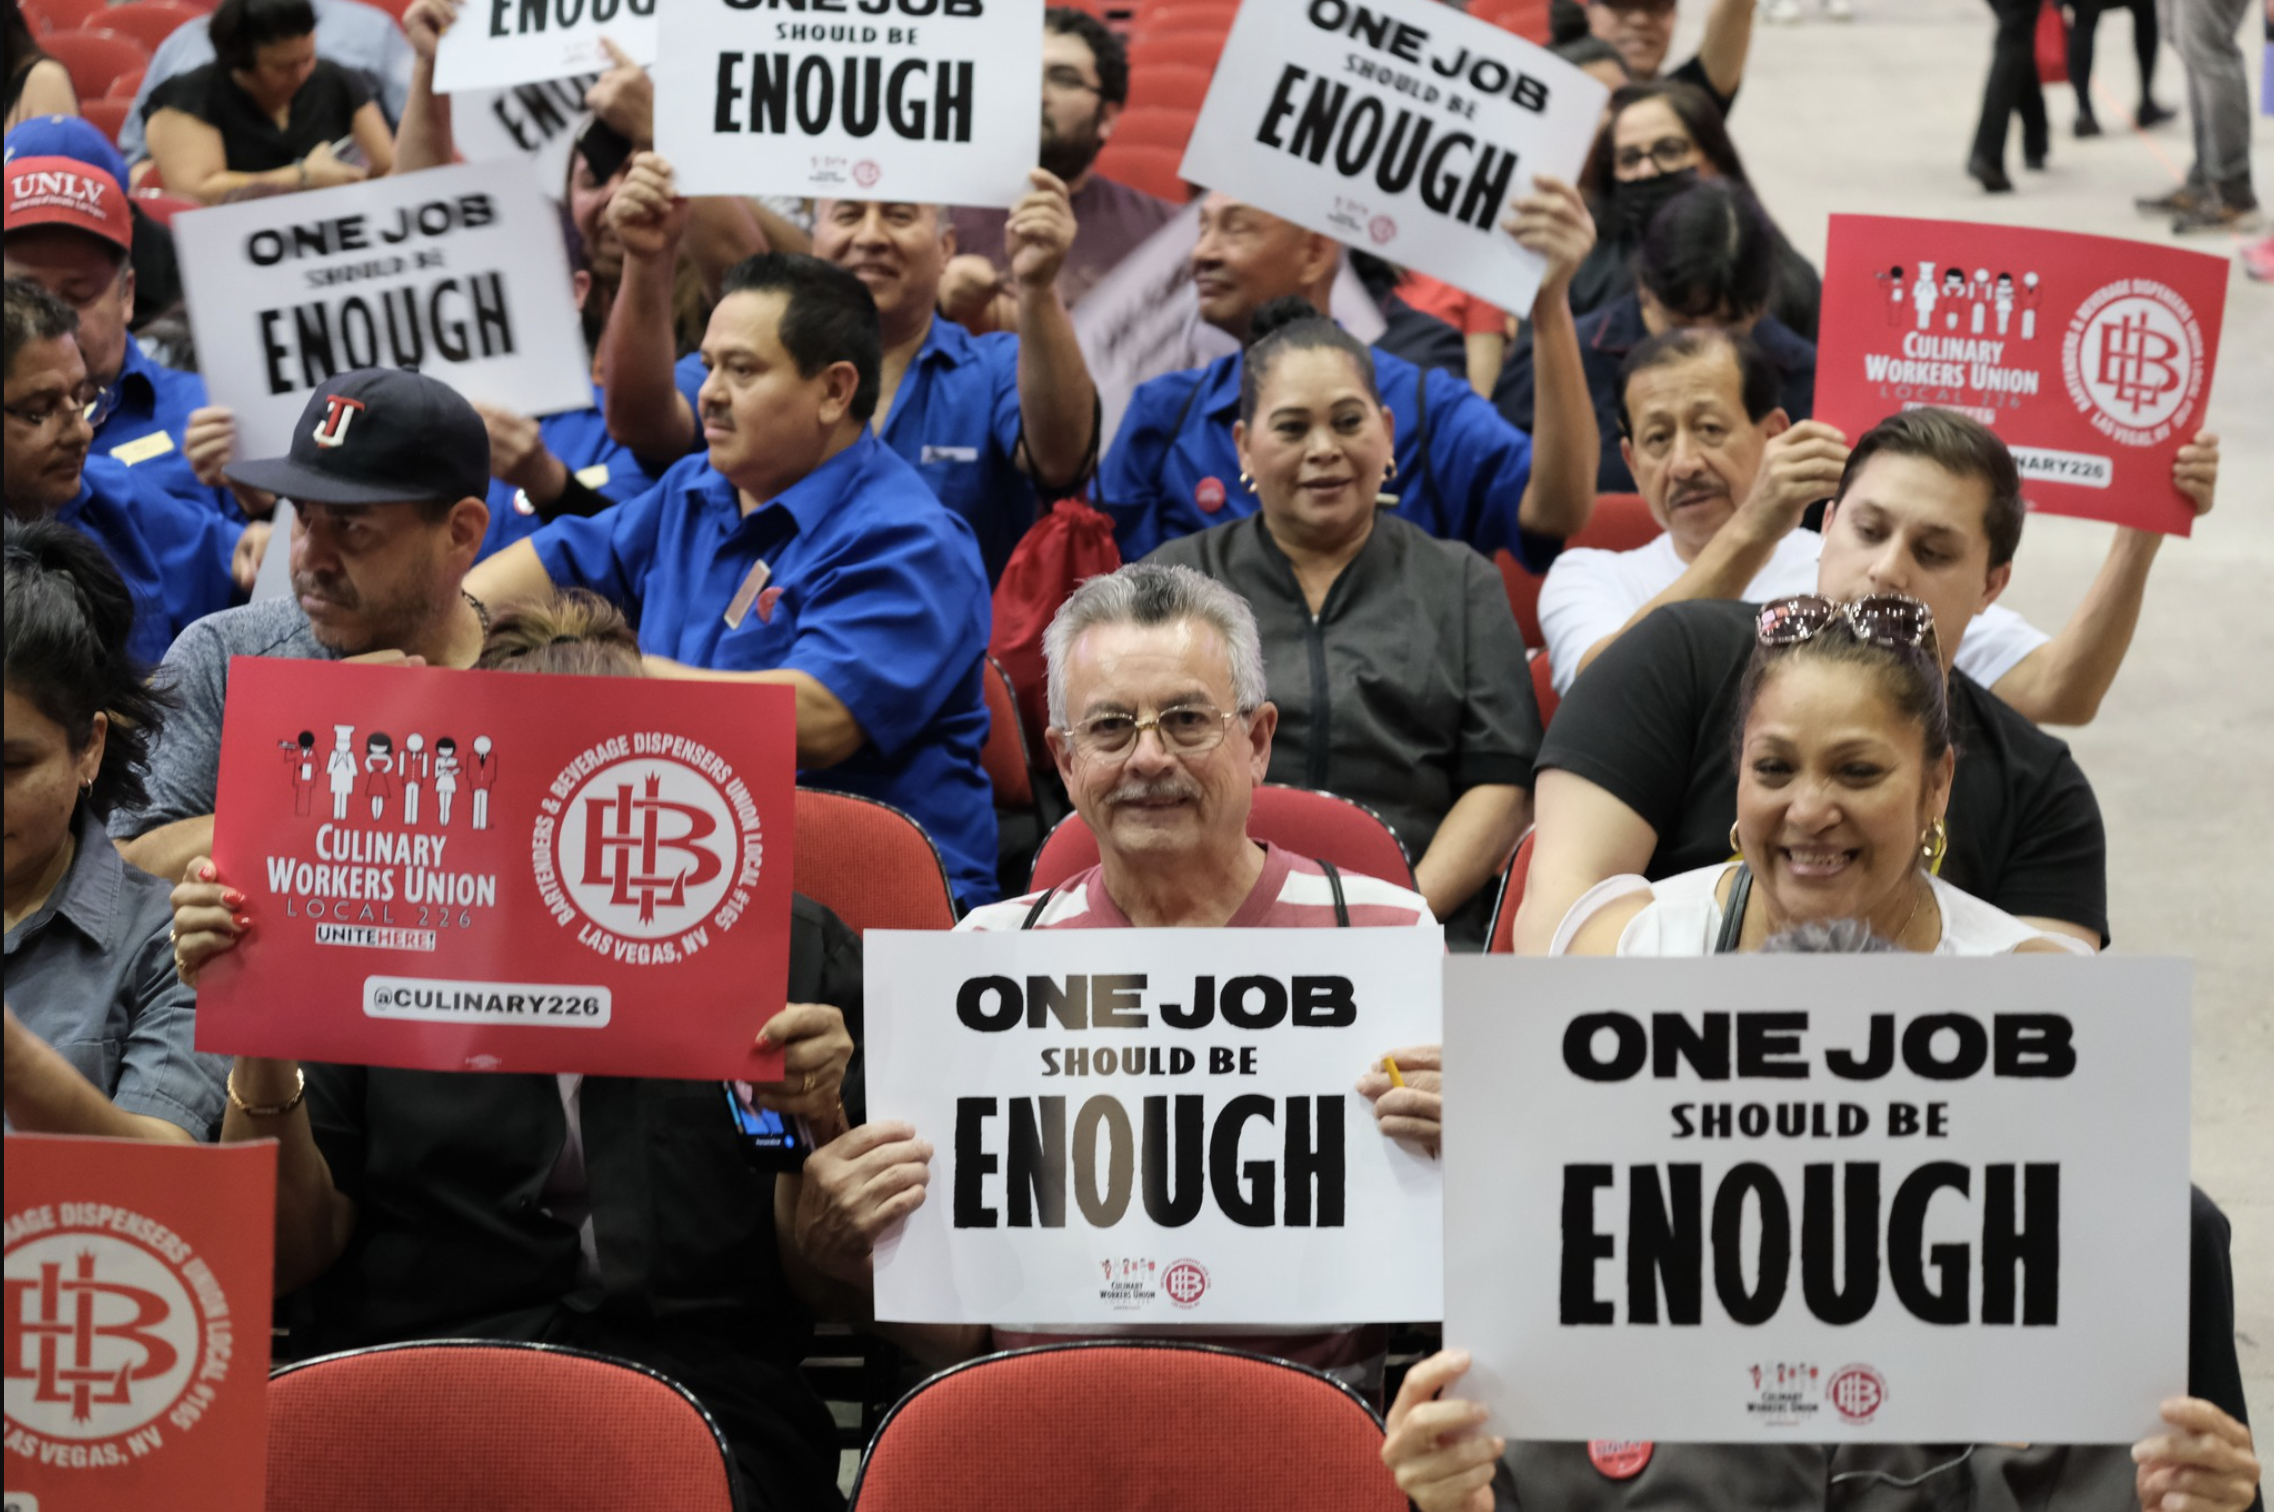 Members of the Las Vegas Culinary Union hold up protest signs.